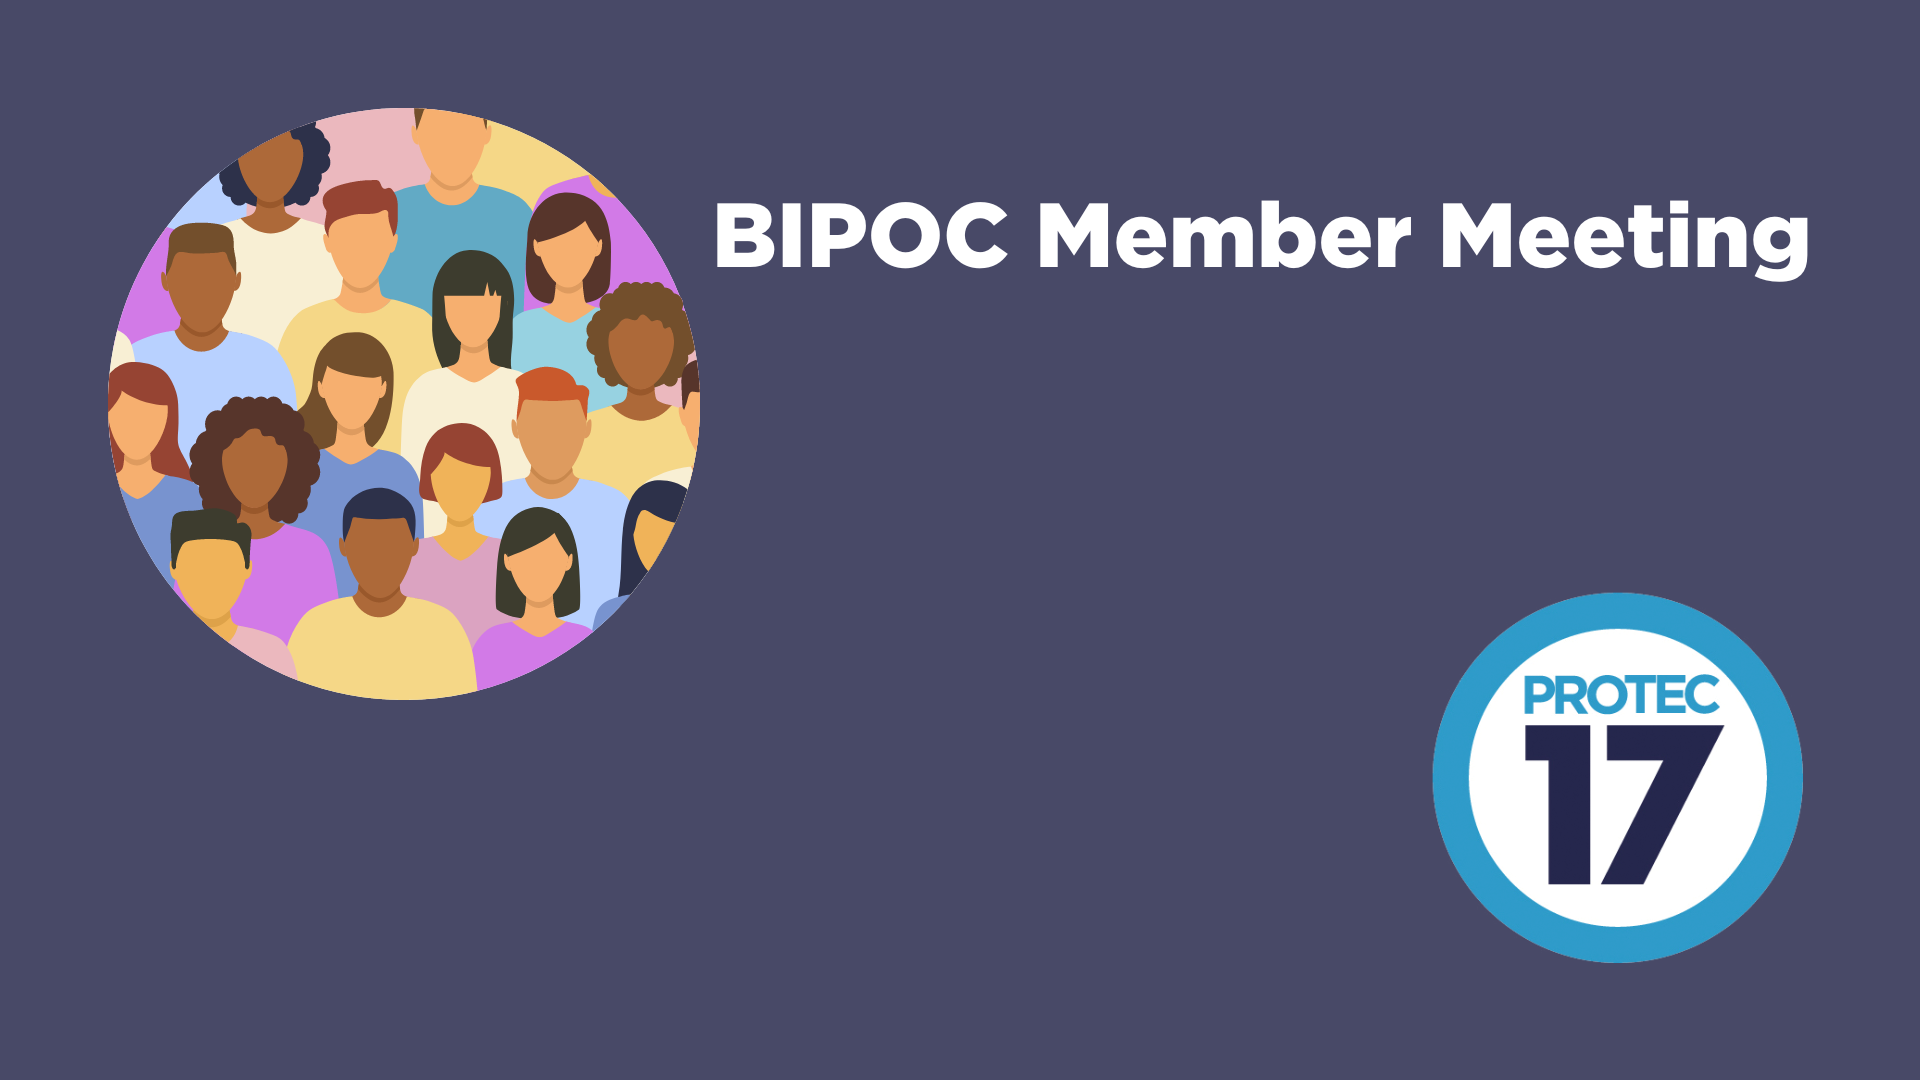 Image that reads, "BIPOC Member Meeting." There is a colorful image of a diversity of people together and the PROTEC17 logo.